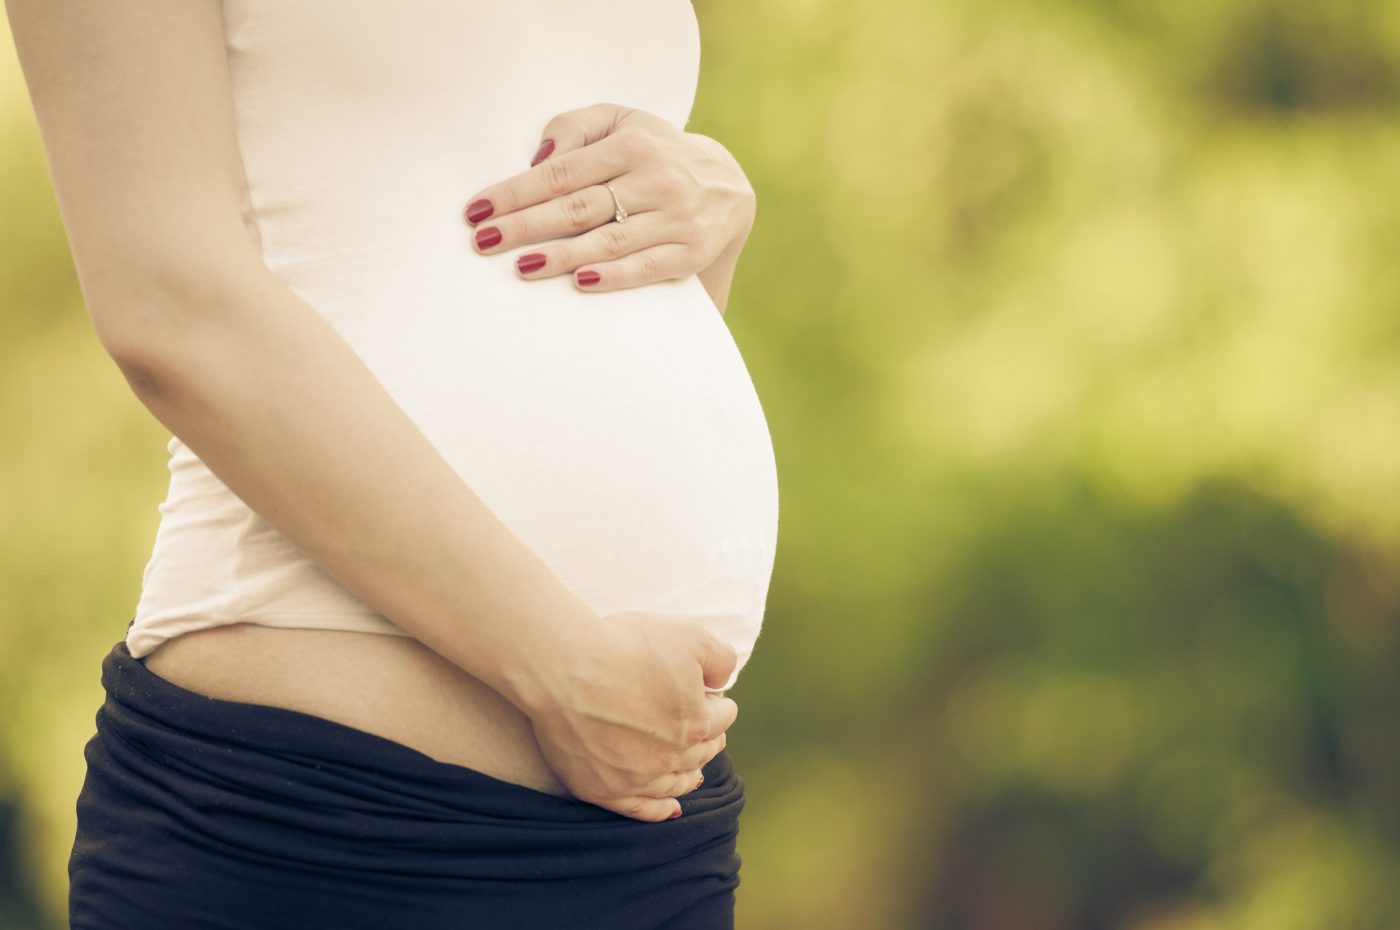 Exercise Reduces Risk of Gestational Diabetes, According To Study